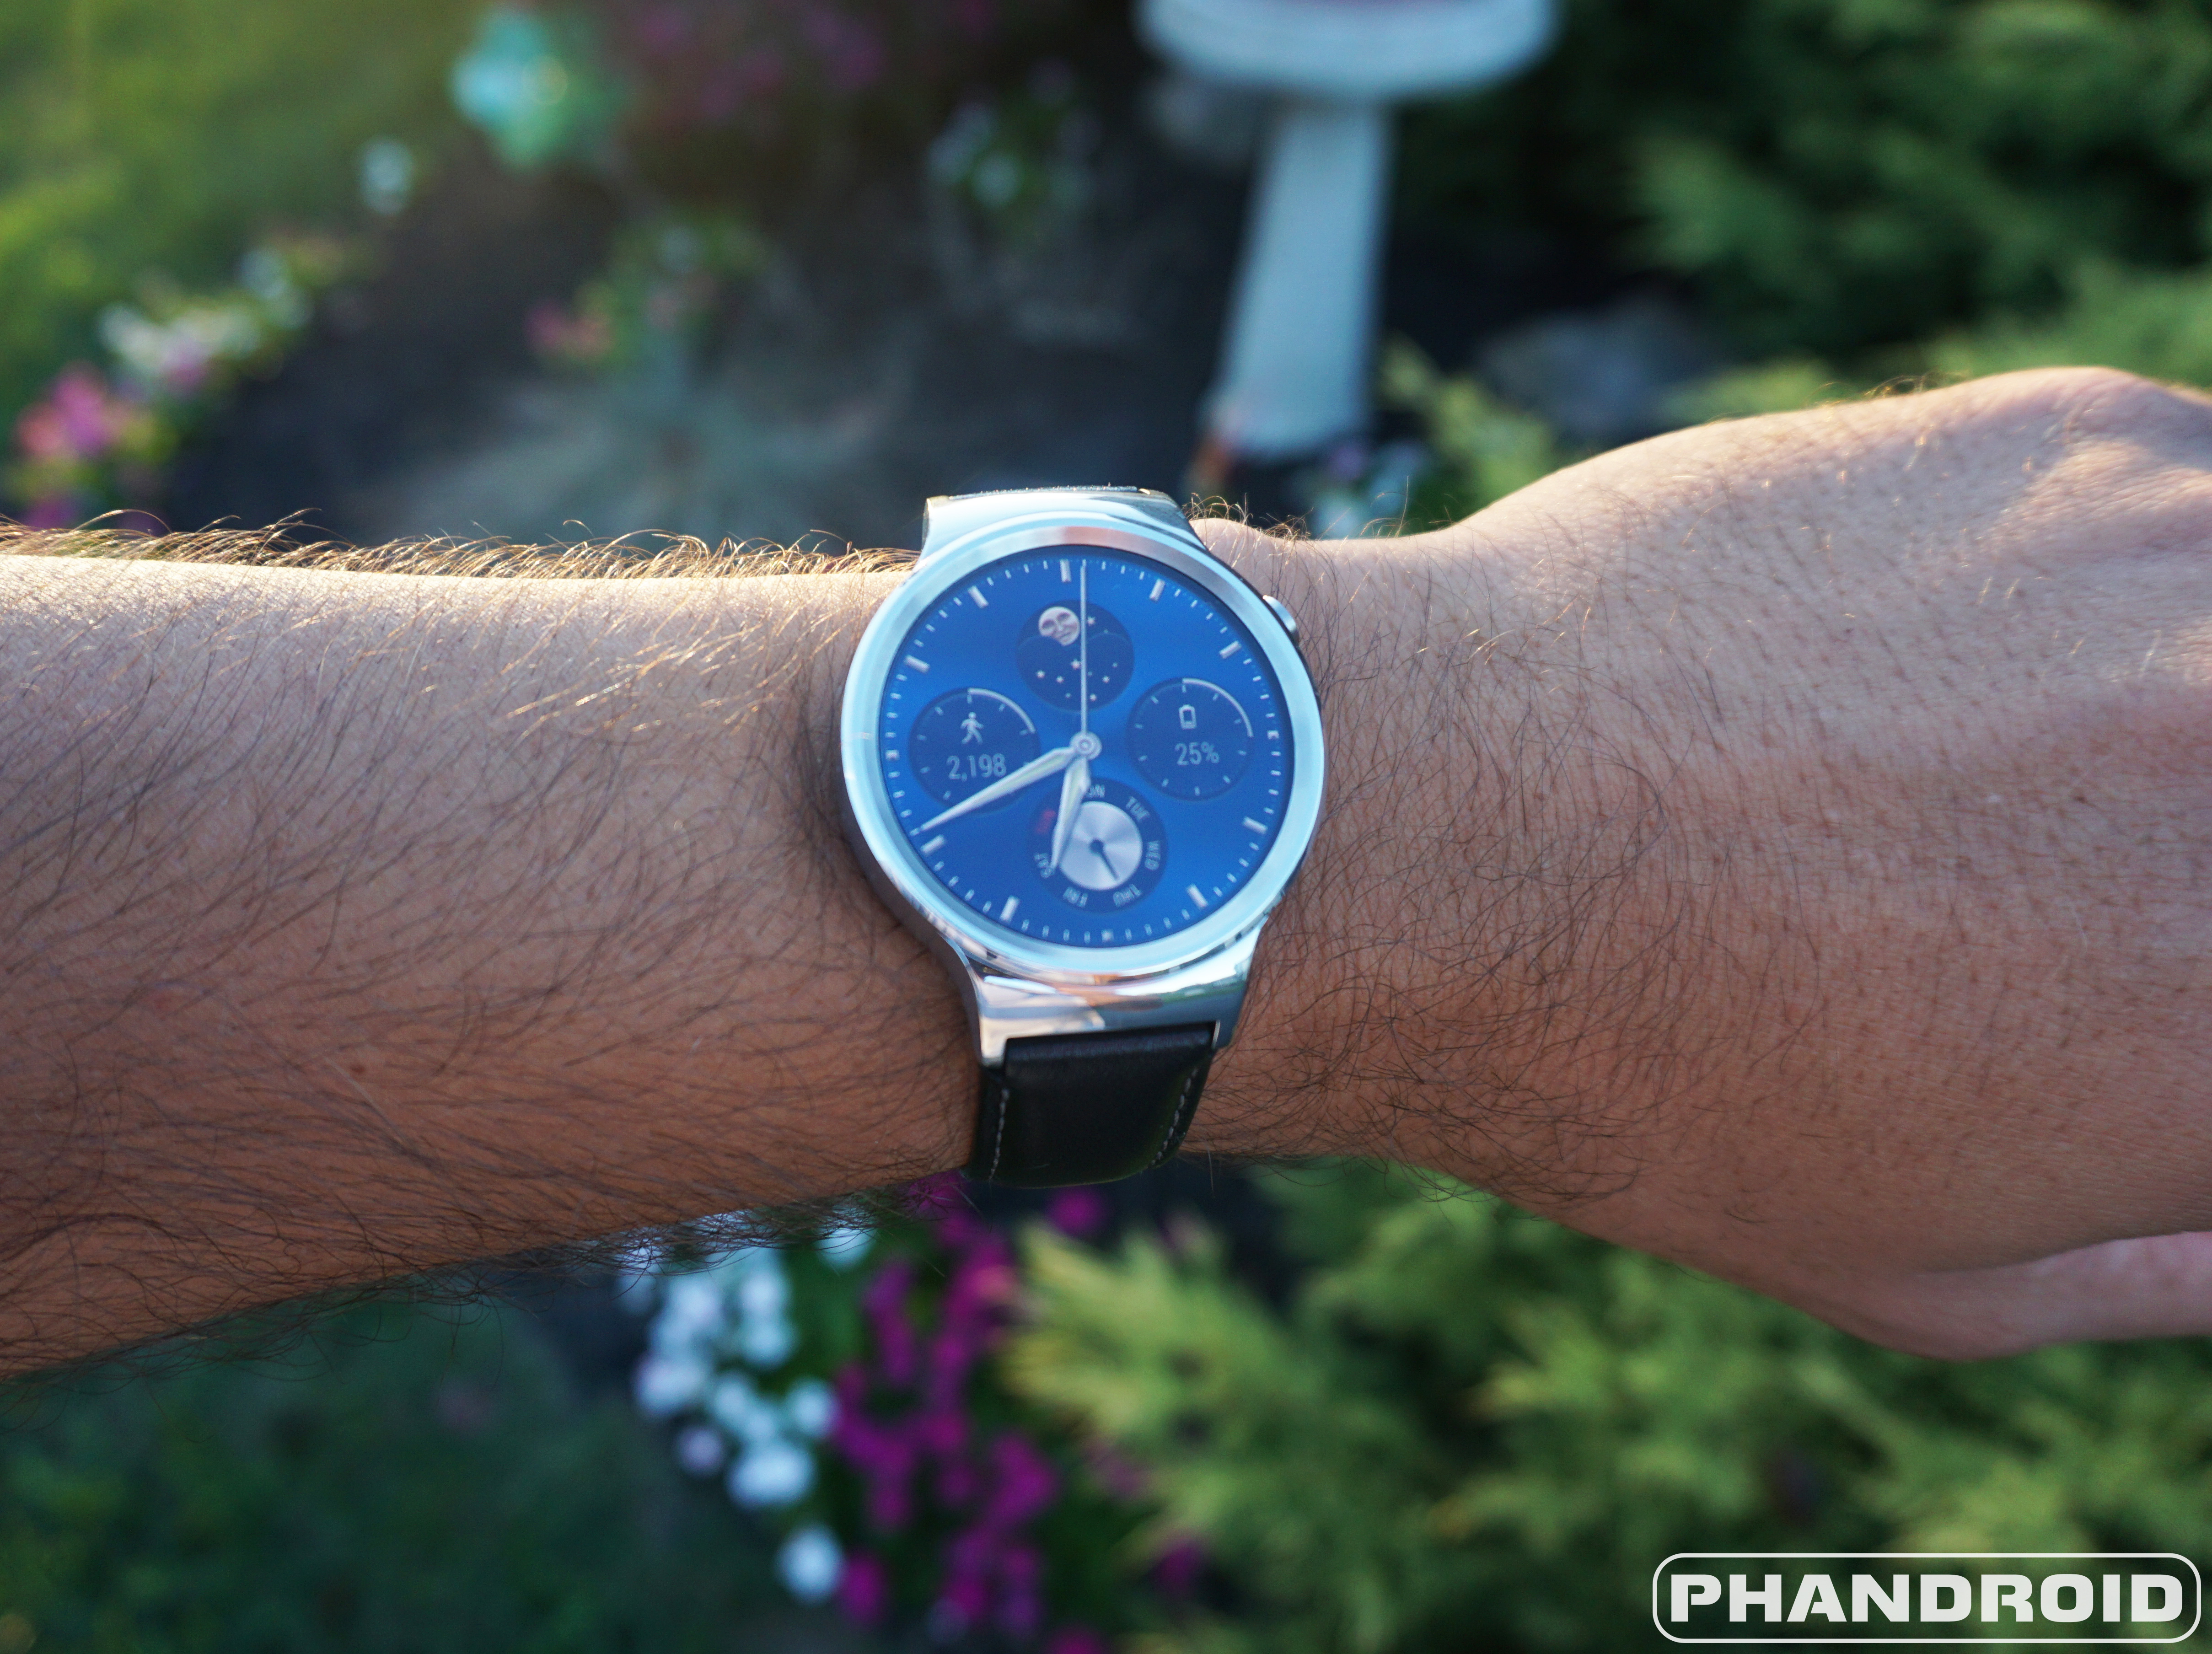 Huawei Review, the Android smartwatch available right now – Phandroid